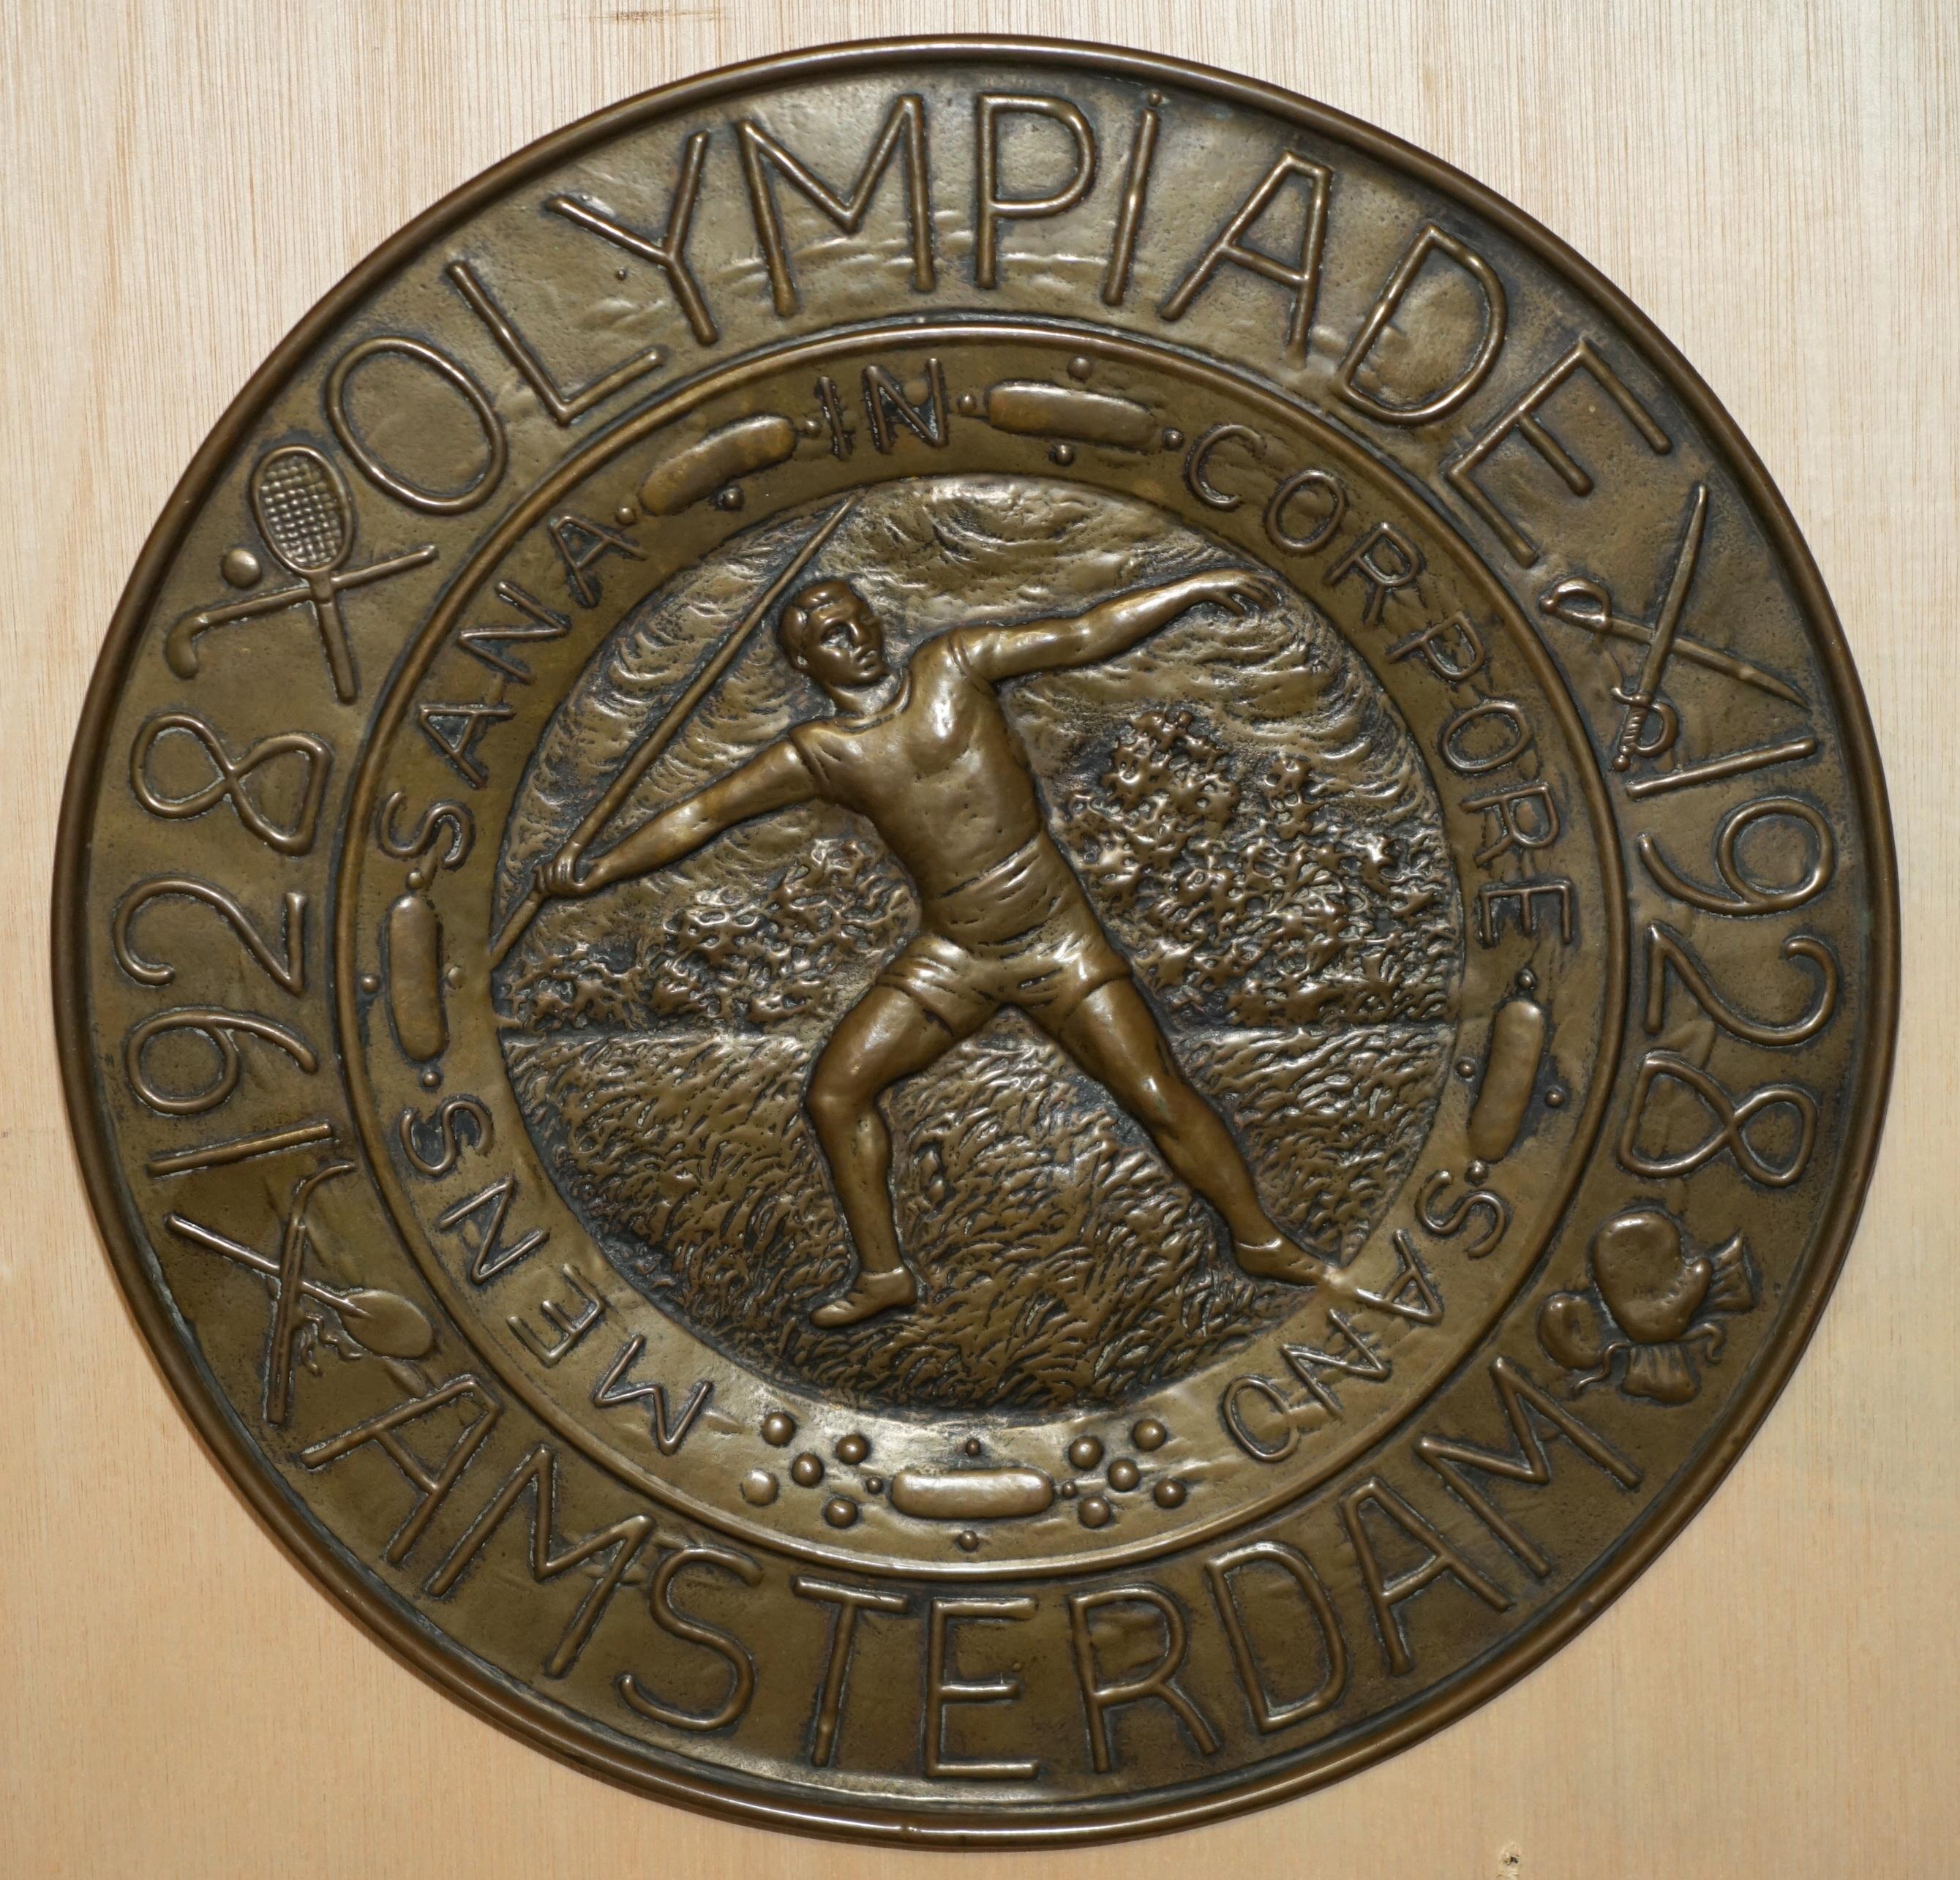 Royal House Antiques is delighted to offer for sale this lovely collectable 1928 Amsterdam Olympics repousse brass hanging wall plaque

A lovely piece of Olympic memorabilia that looks decorative in any setting 

The sport was javelin and I have